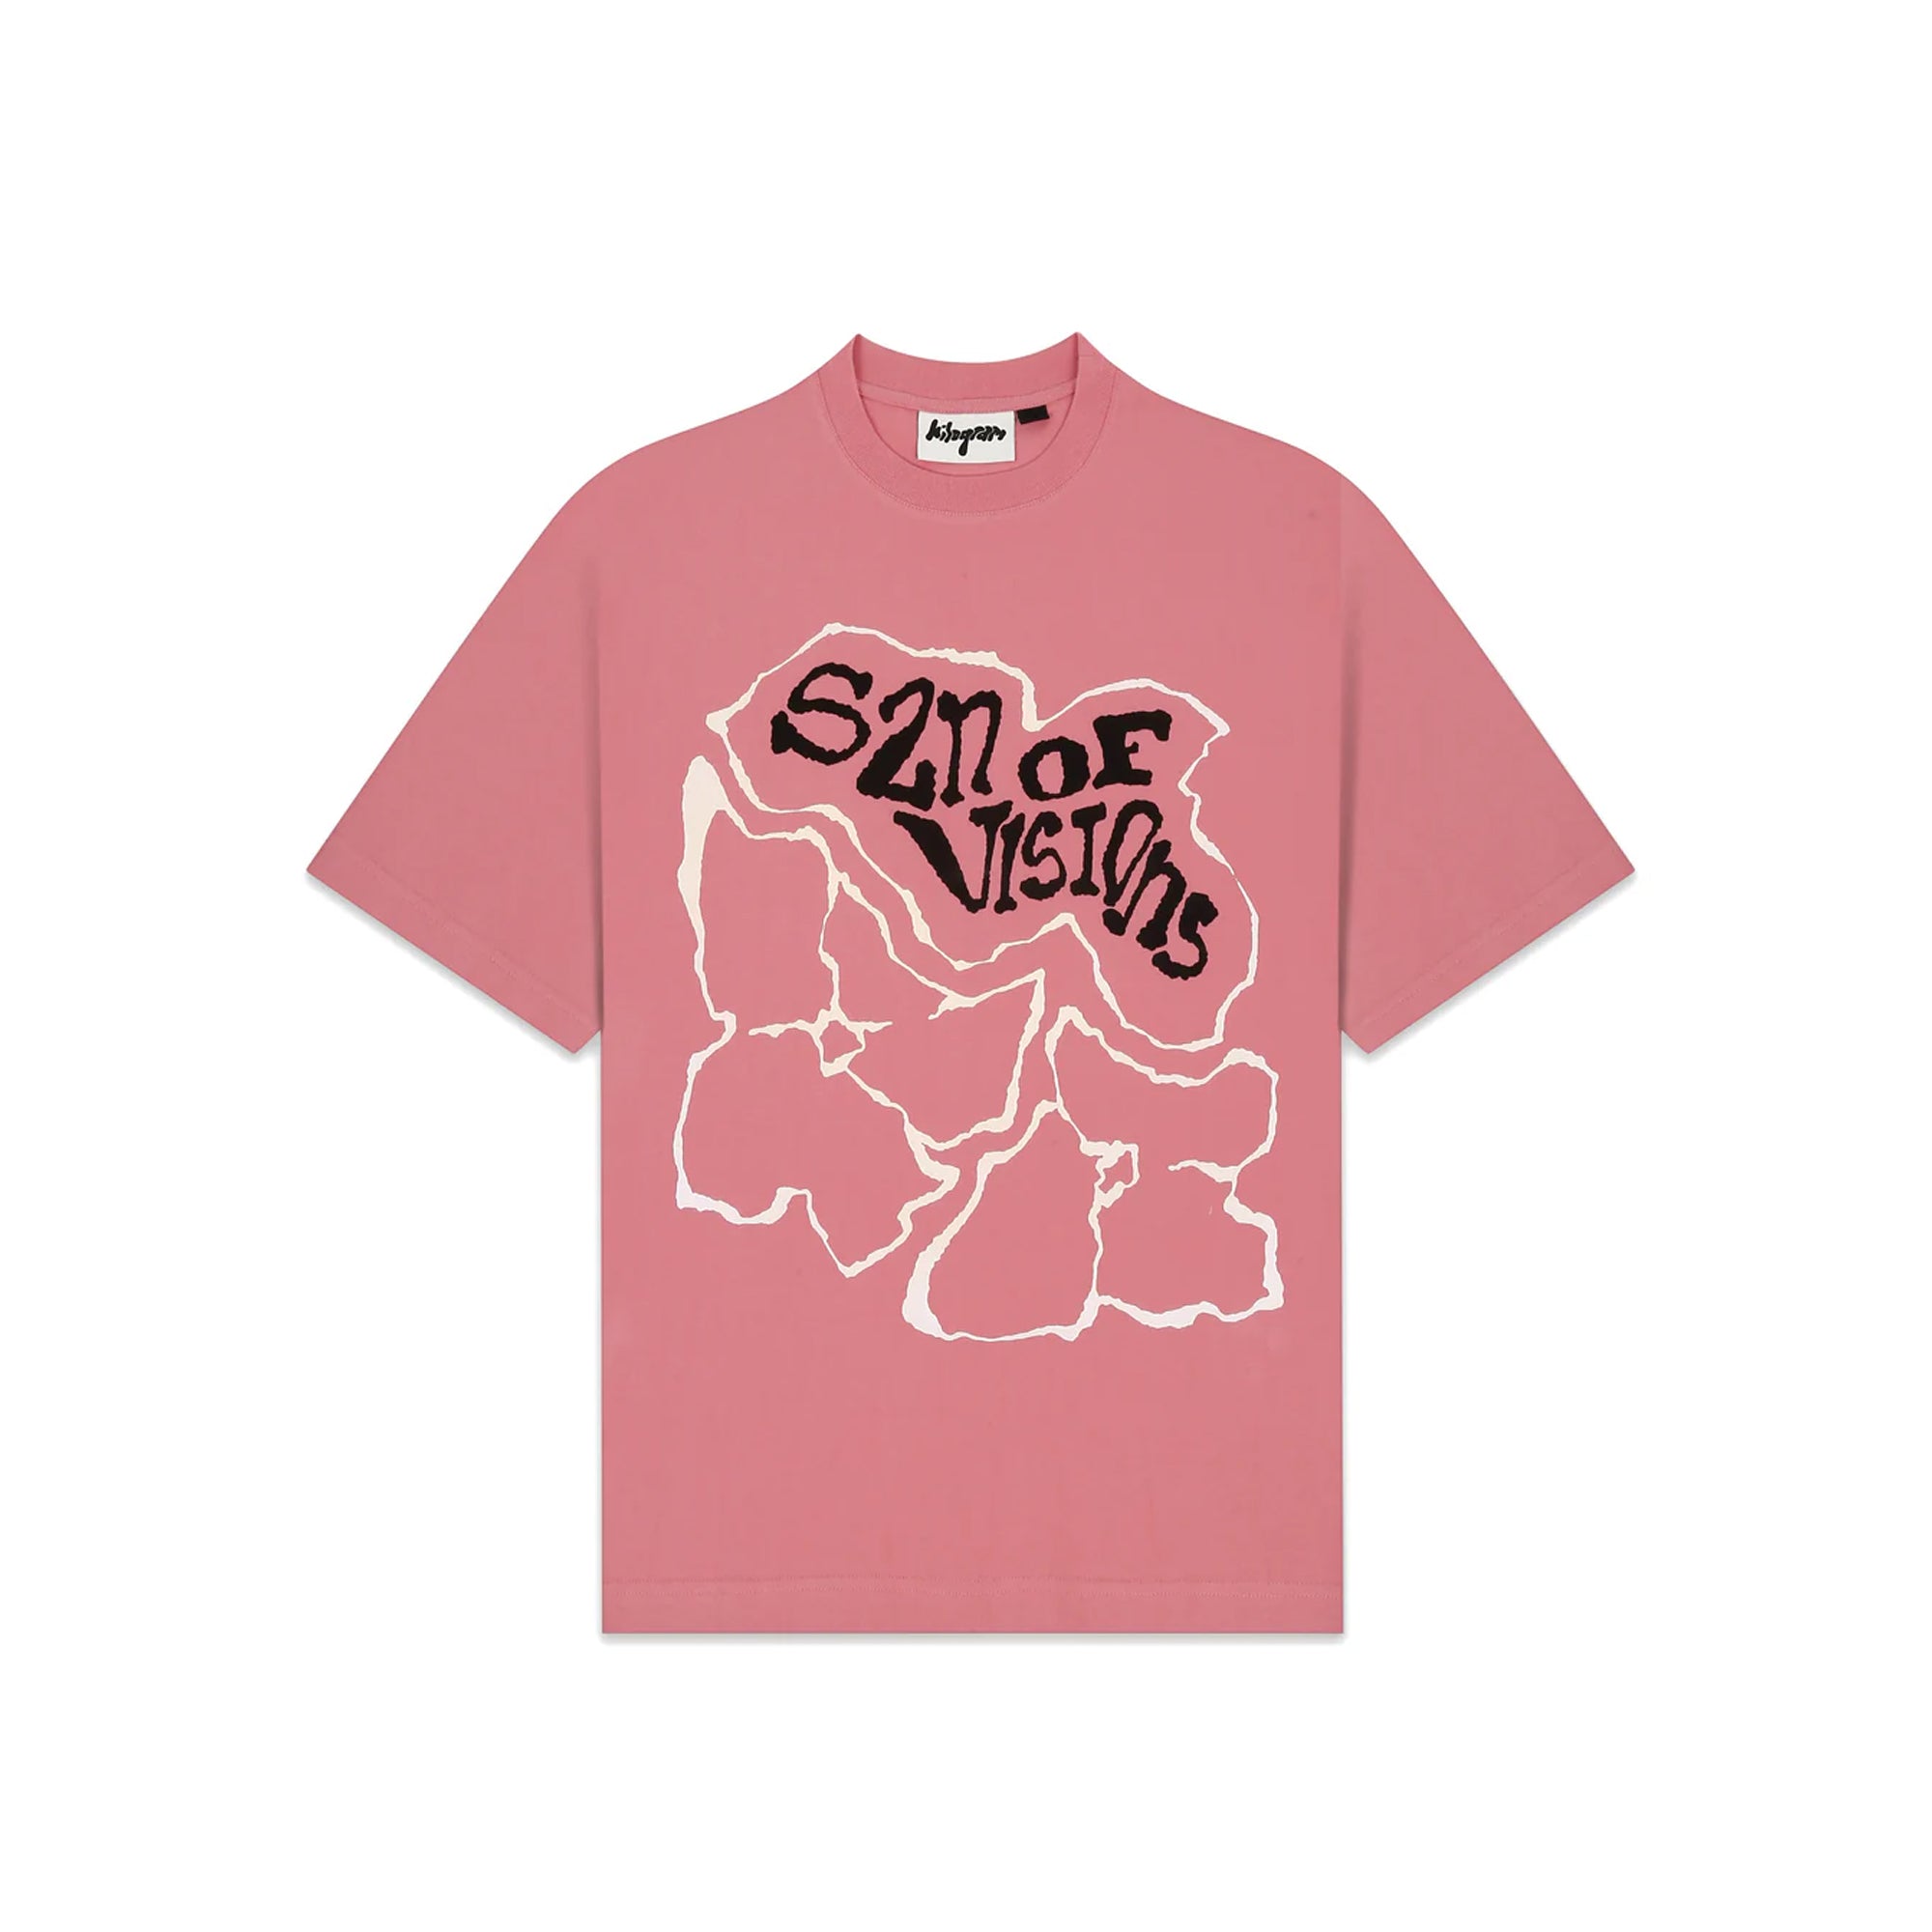 'SZN of Visions' Tee